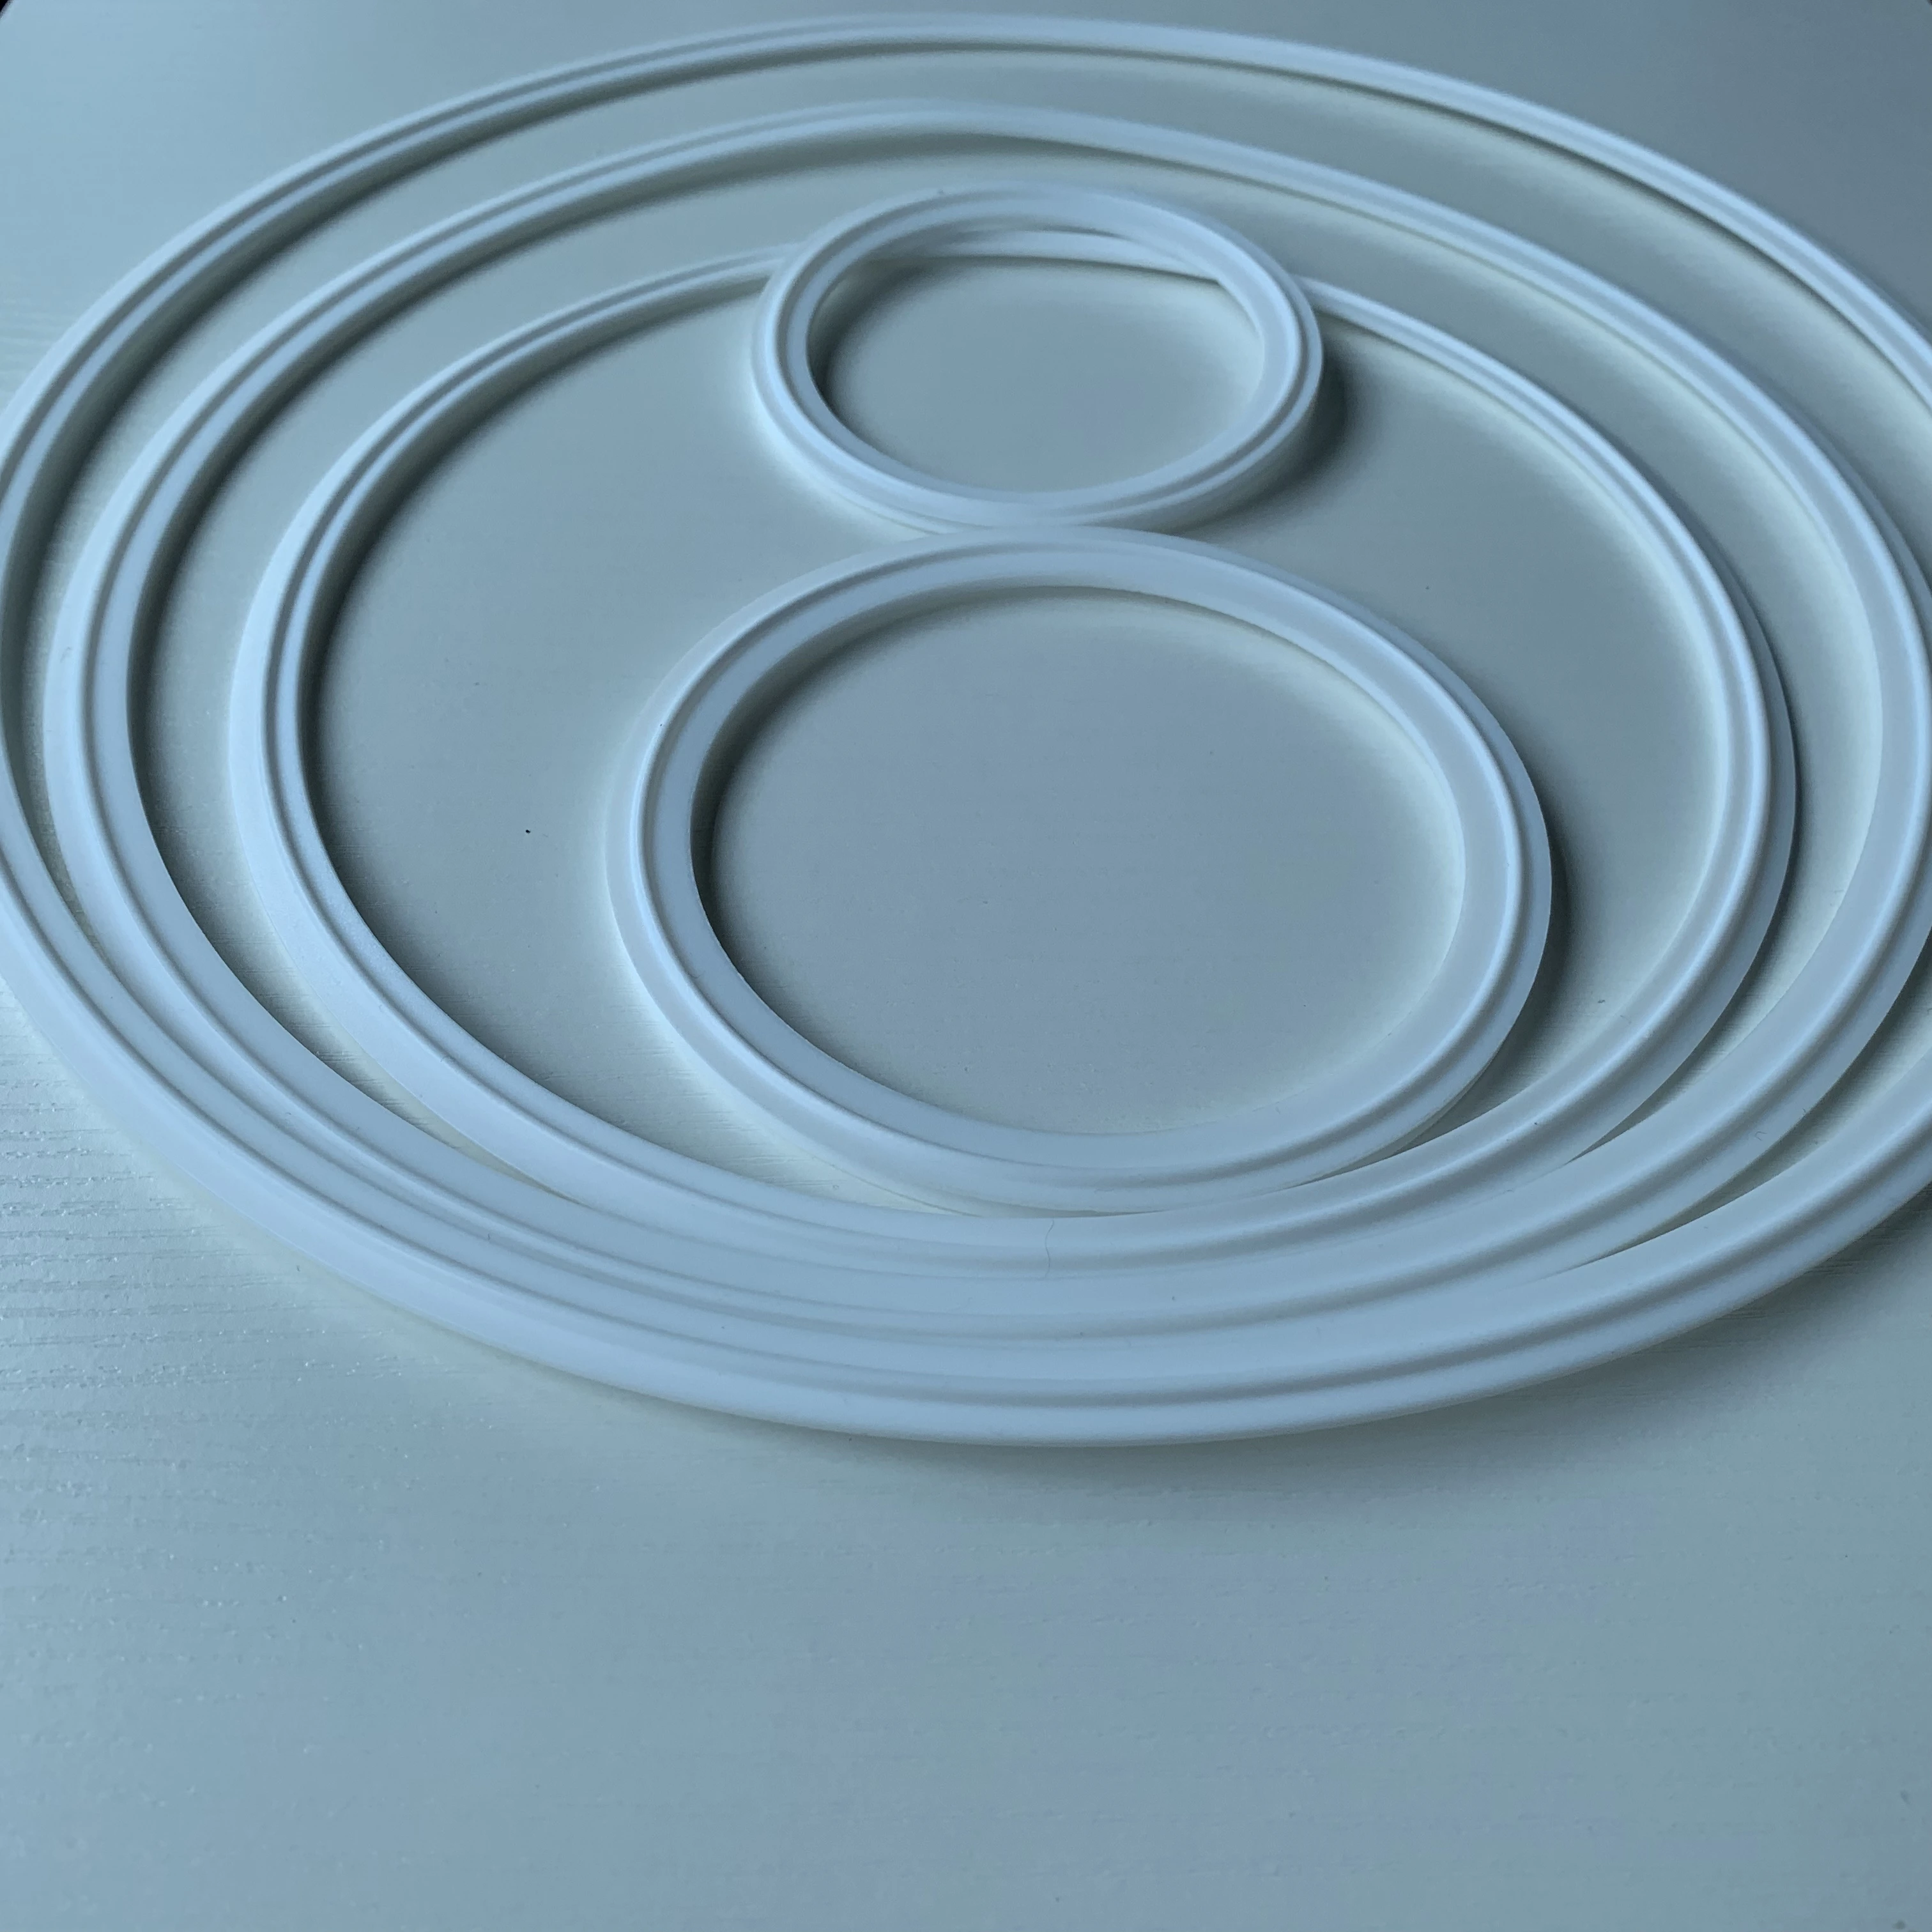 
PTFE Standard Clamp Gaskets for 2' 